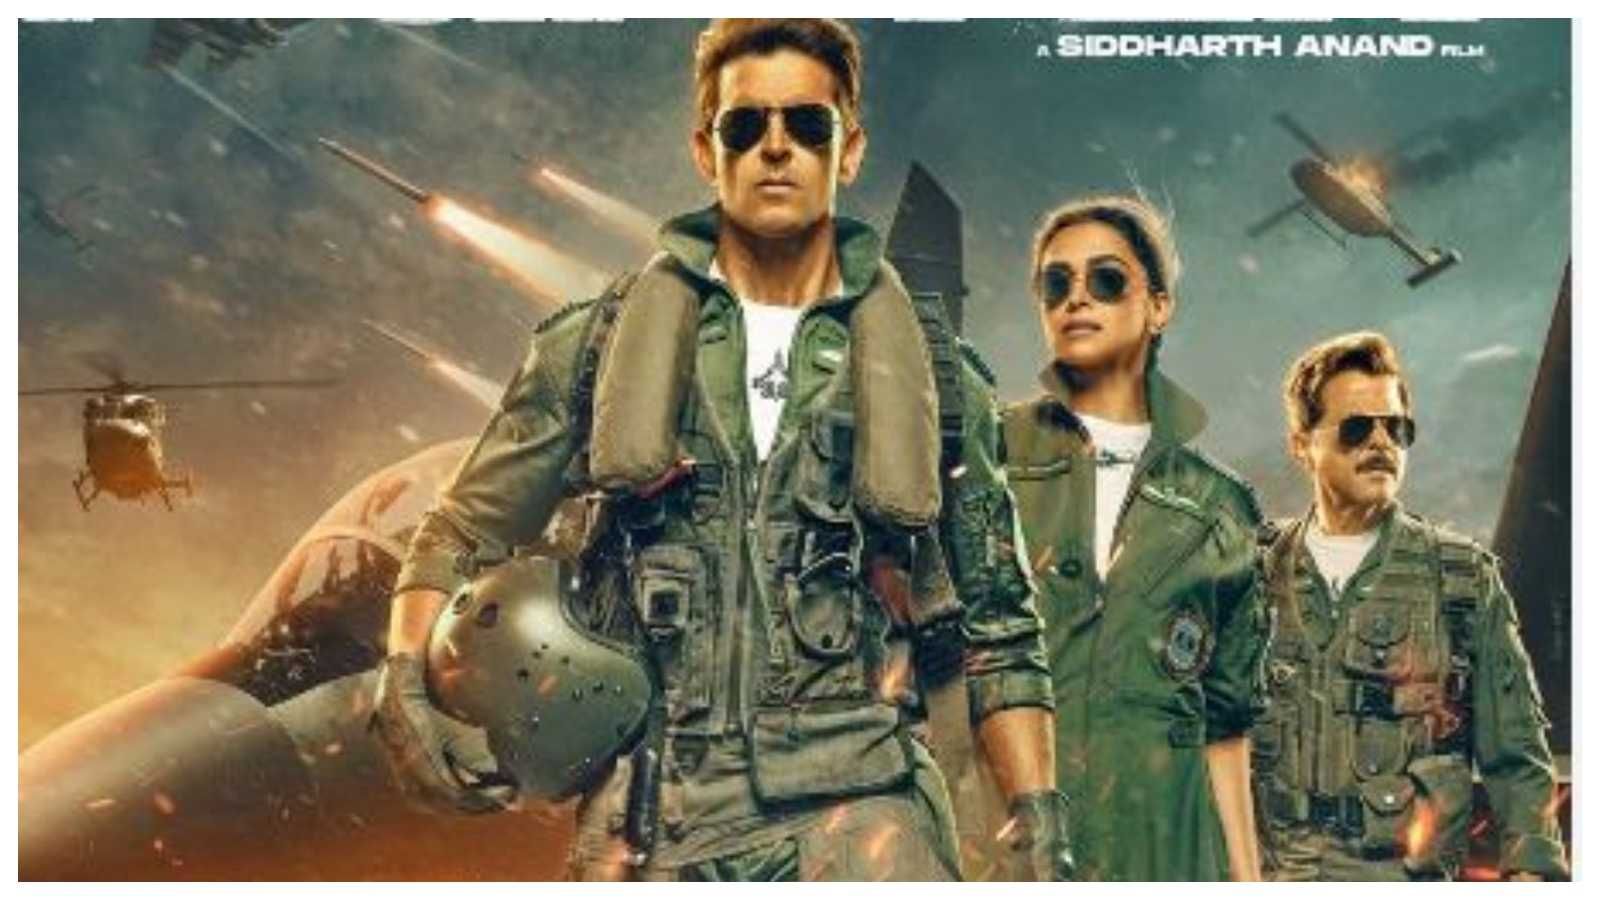 Fighter cast fees revealed: Here’s how much Hrithik Roshan, Deepika Padukone and others are charging for the film